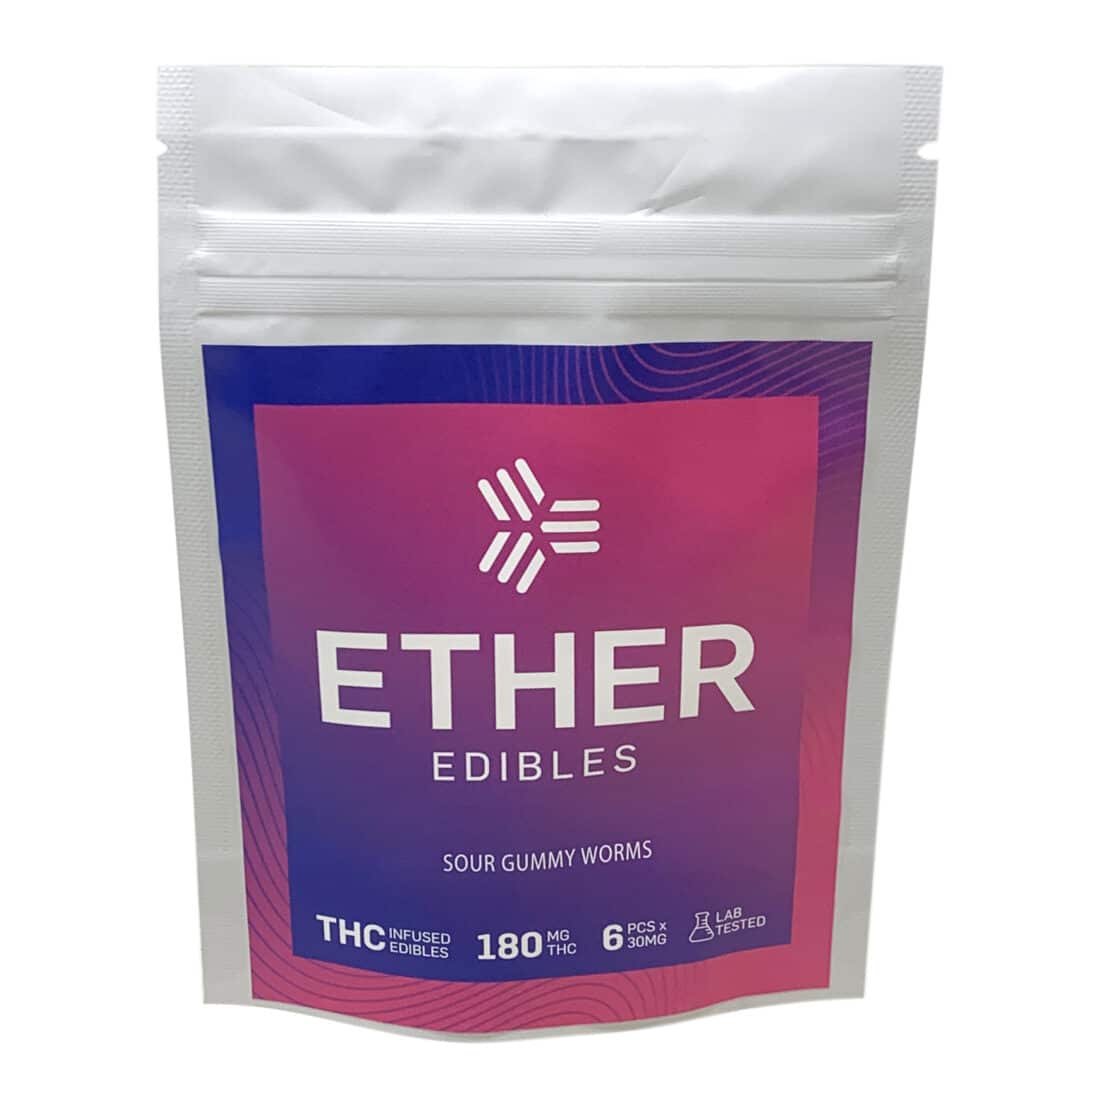 Ether Edibles – Sour Gummy Worms